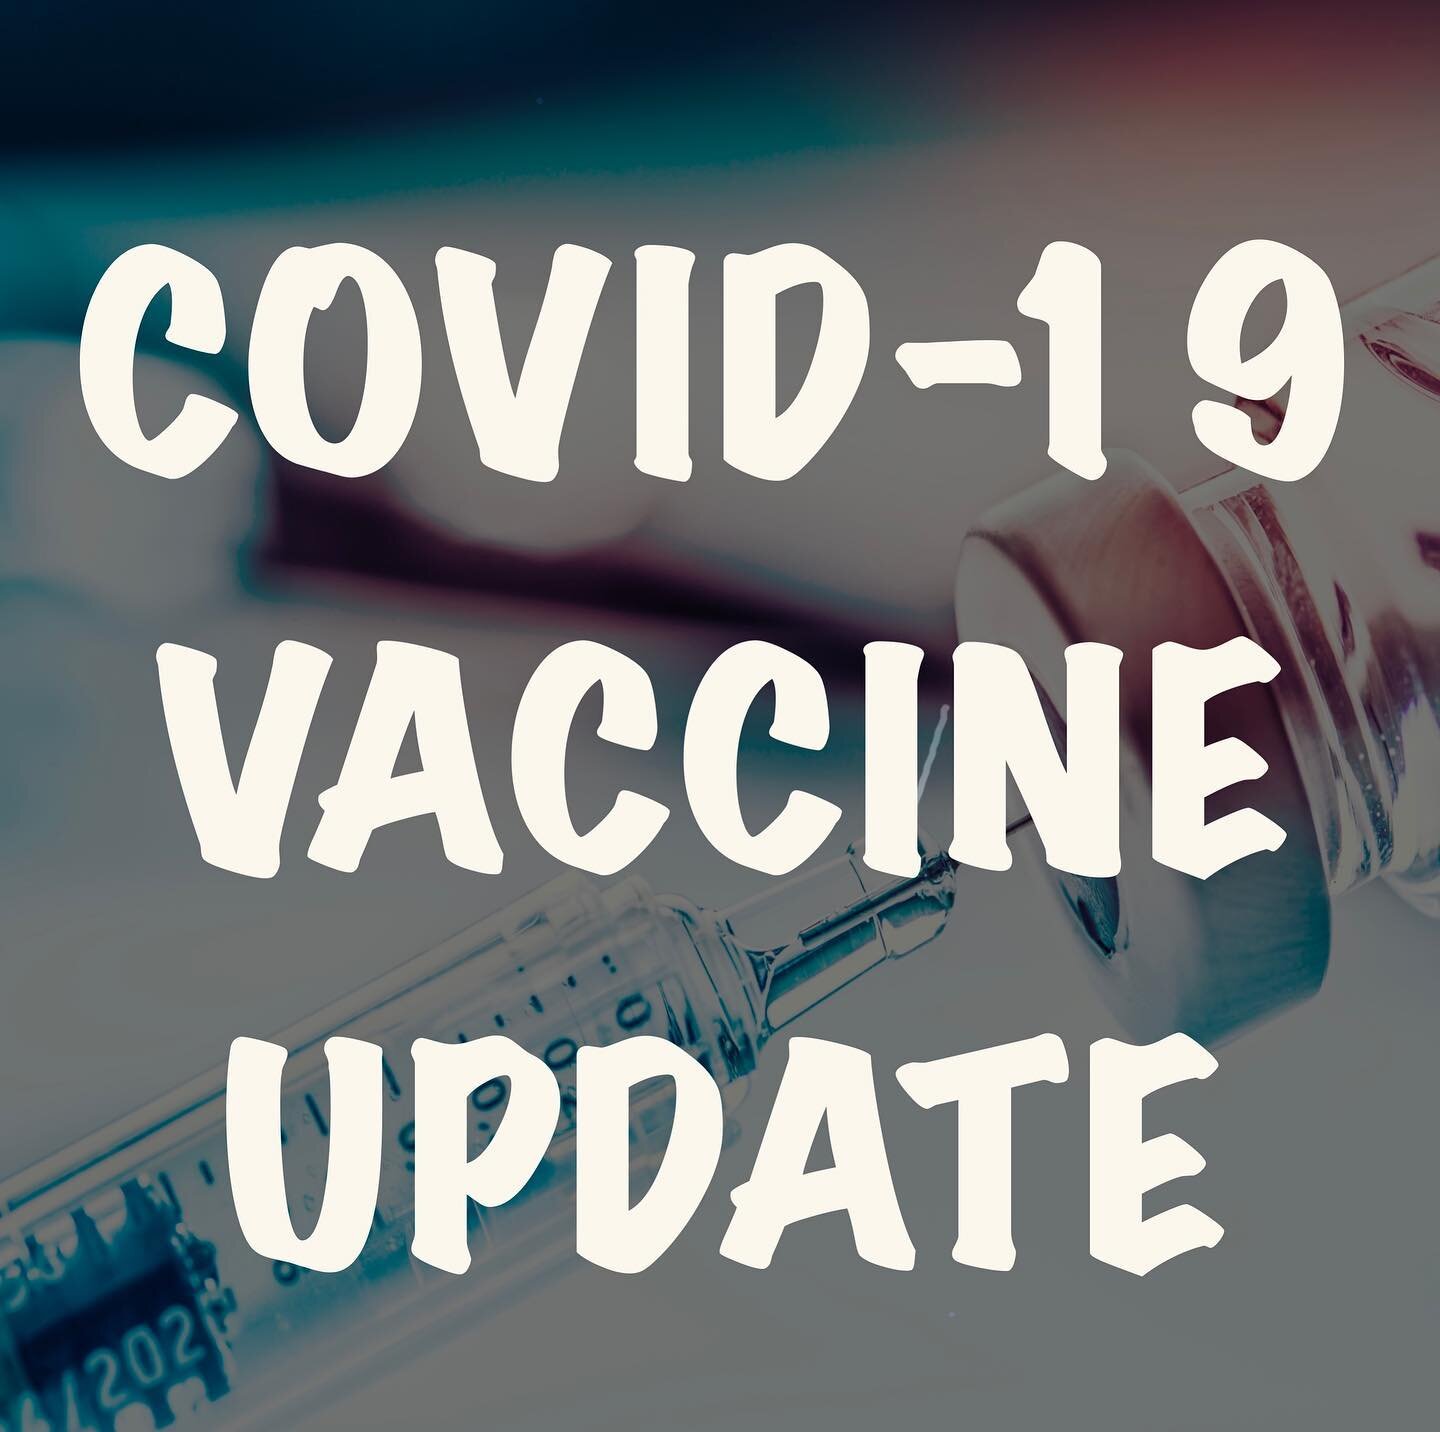 The Richmond City Health District released a statement about the COVID-19 vaccination campaign. You can read an abbreviated version above and visit the link in our bio for more detailed information.